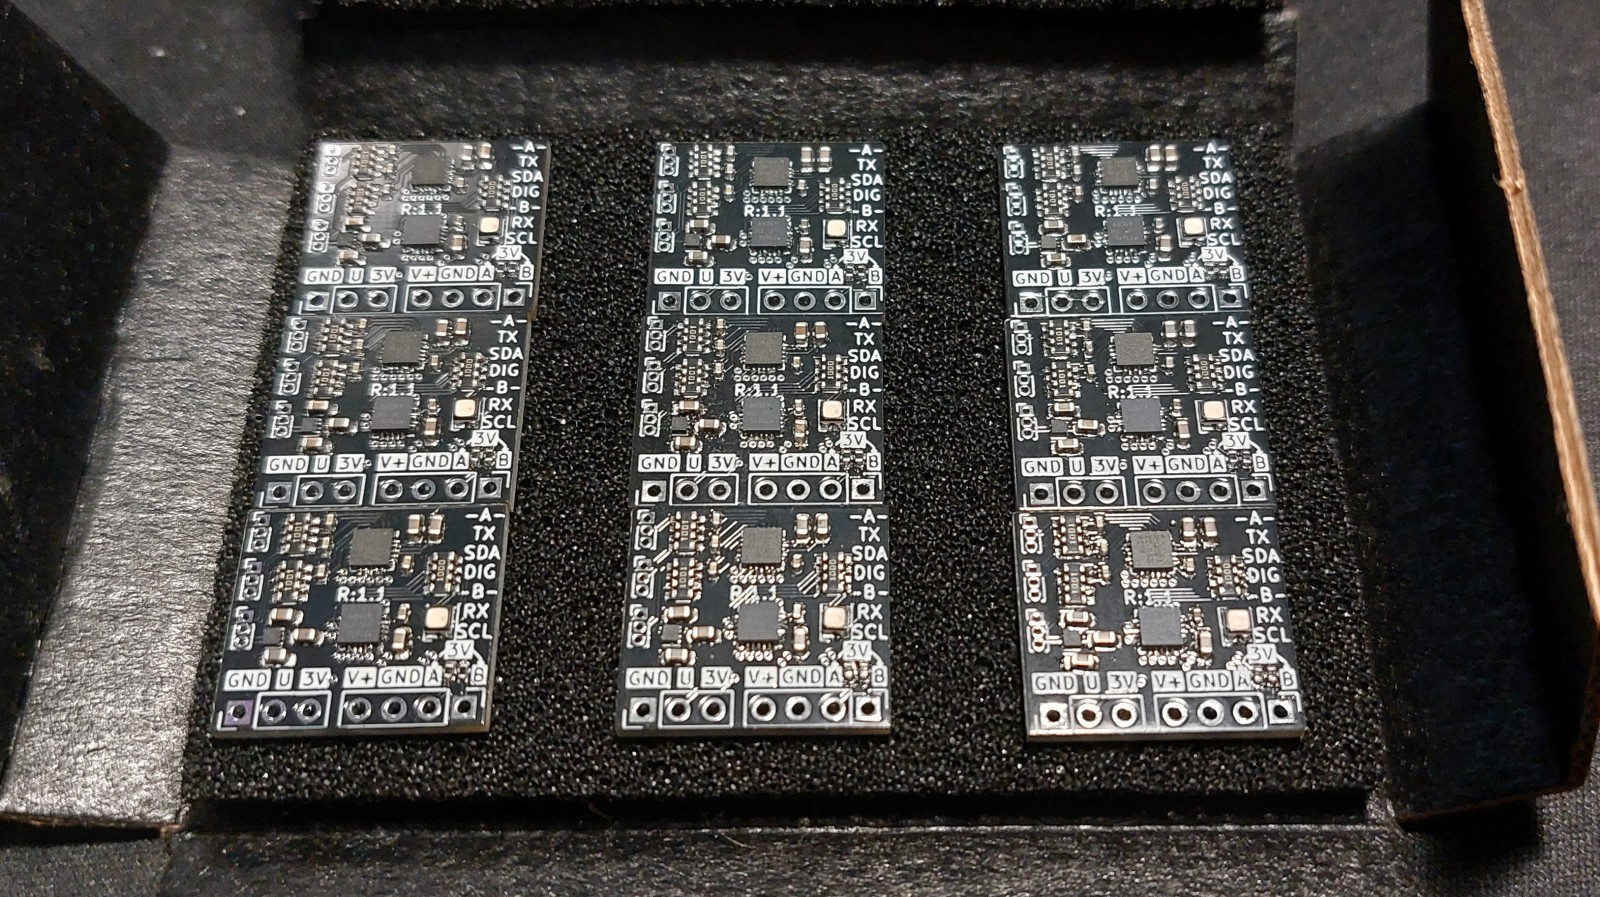 Array of assembled boards ready for final assembly.